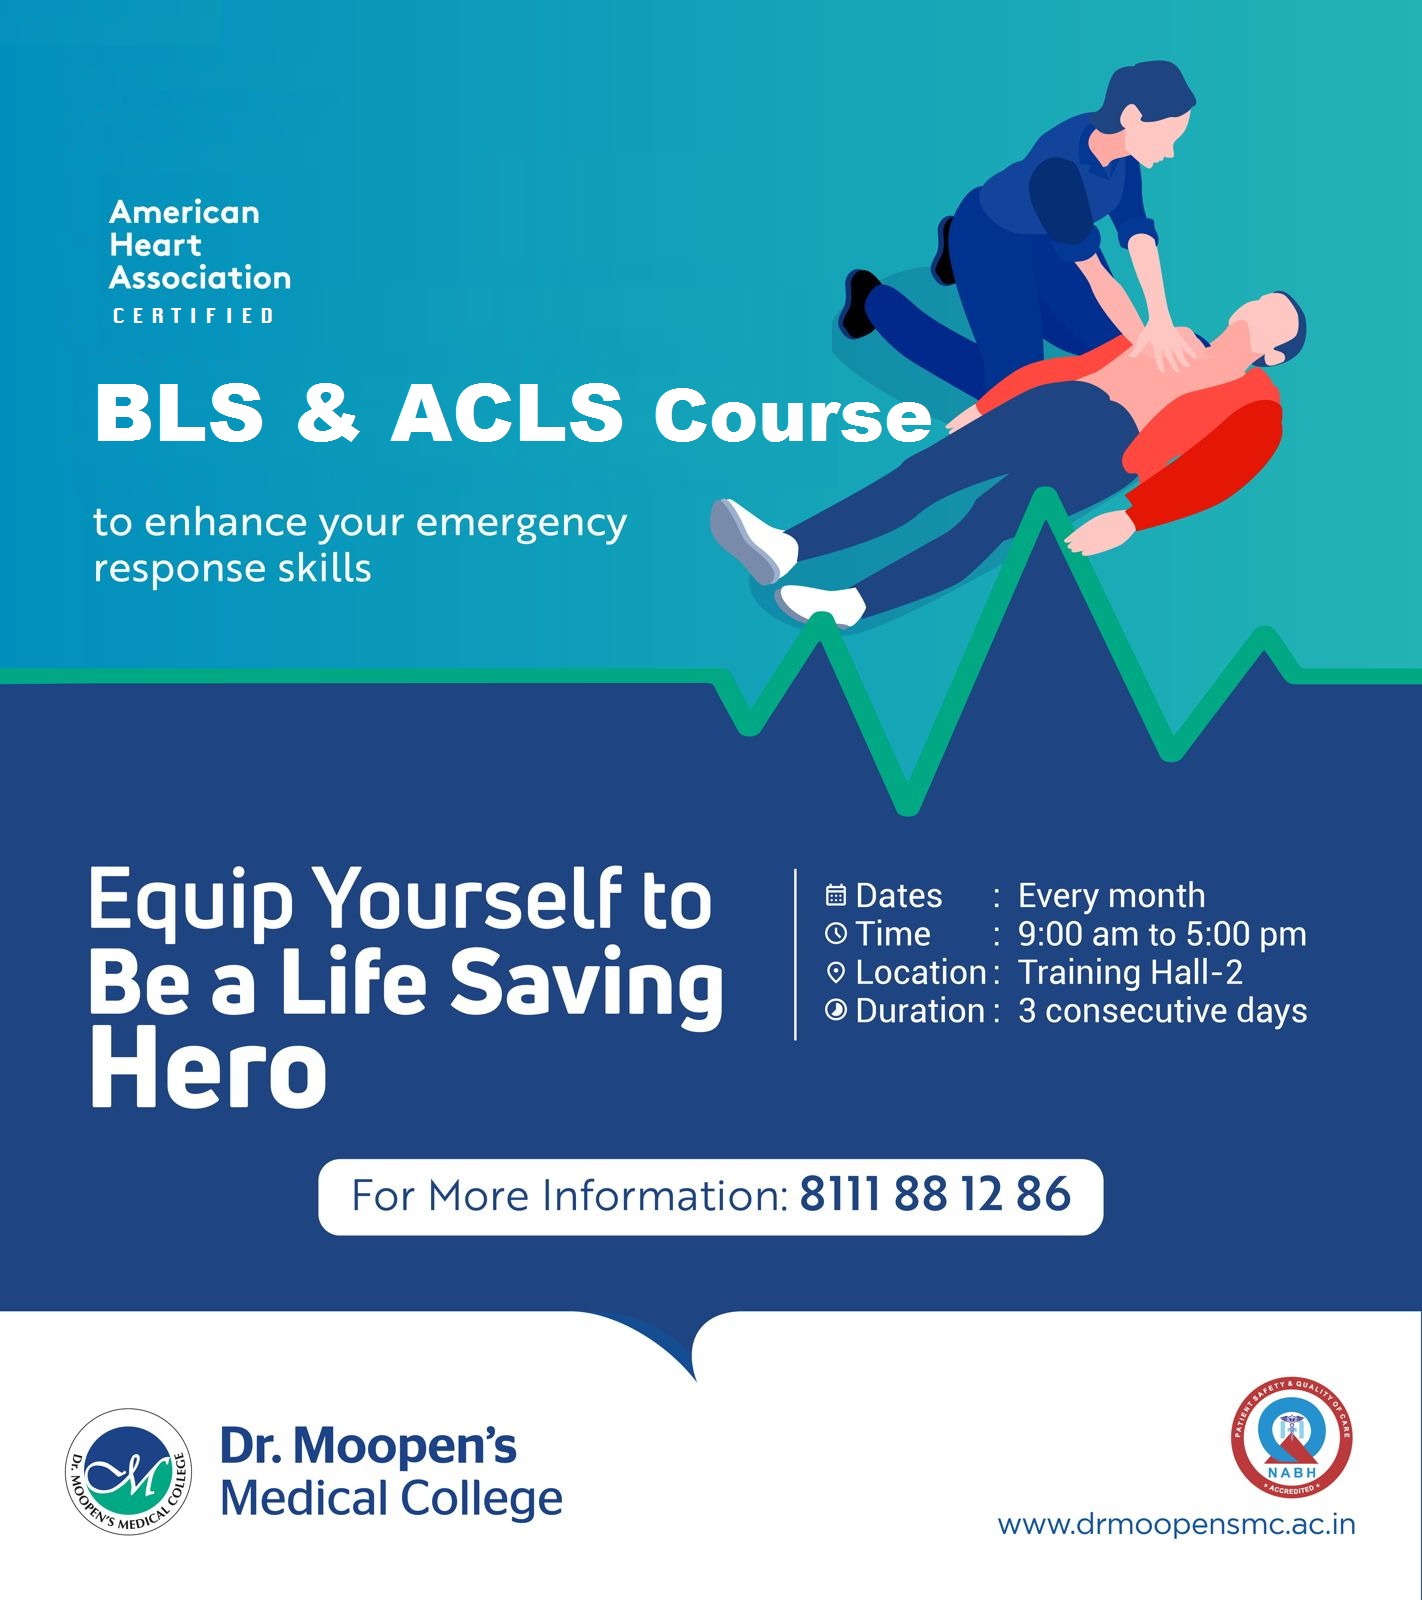 BLS & ACLS Course